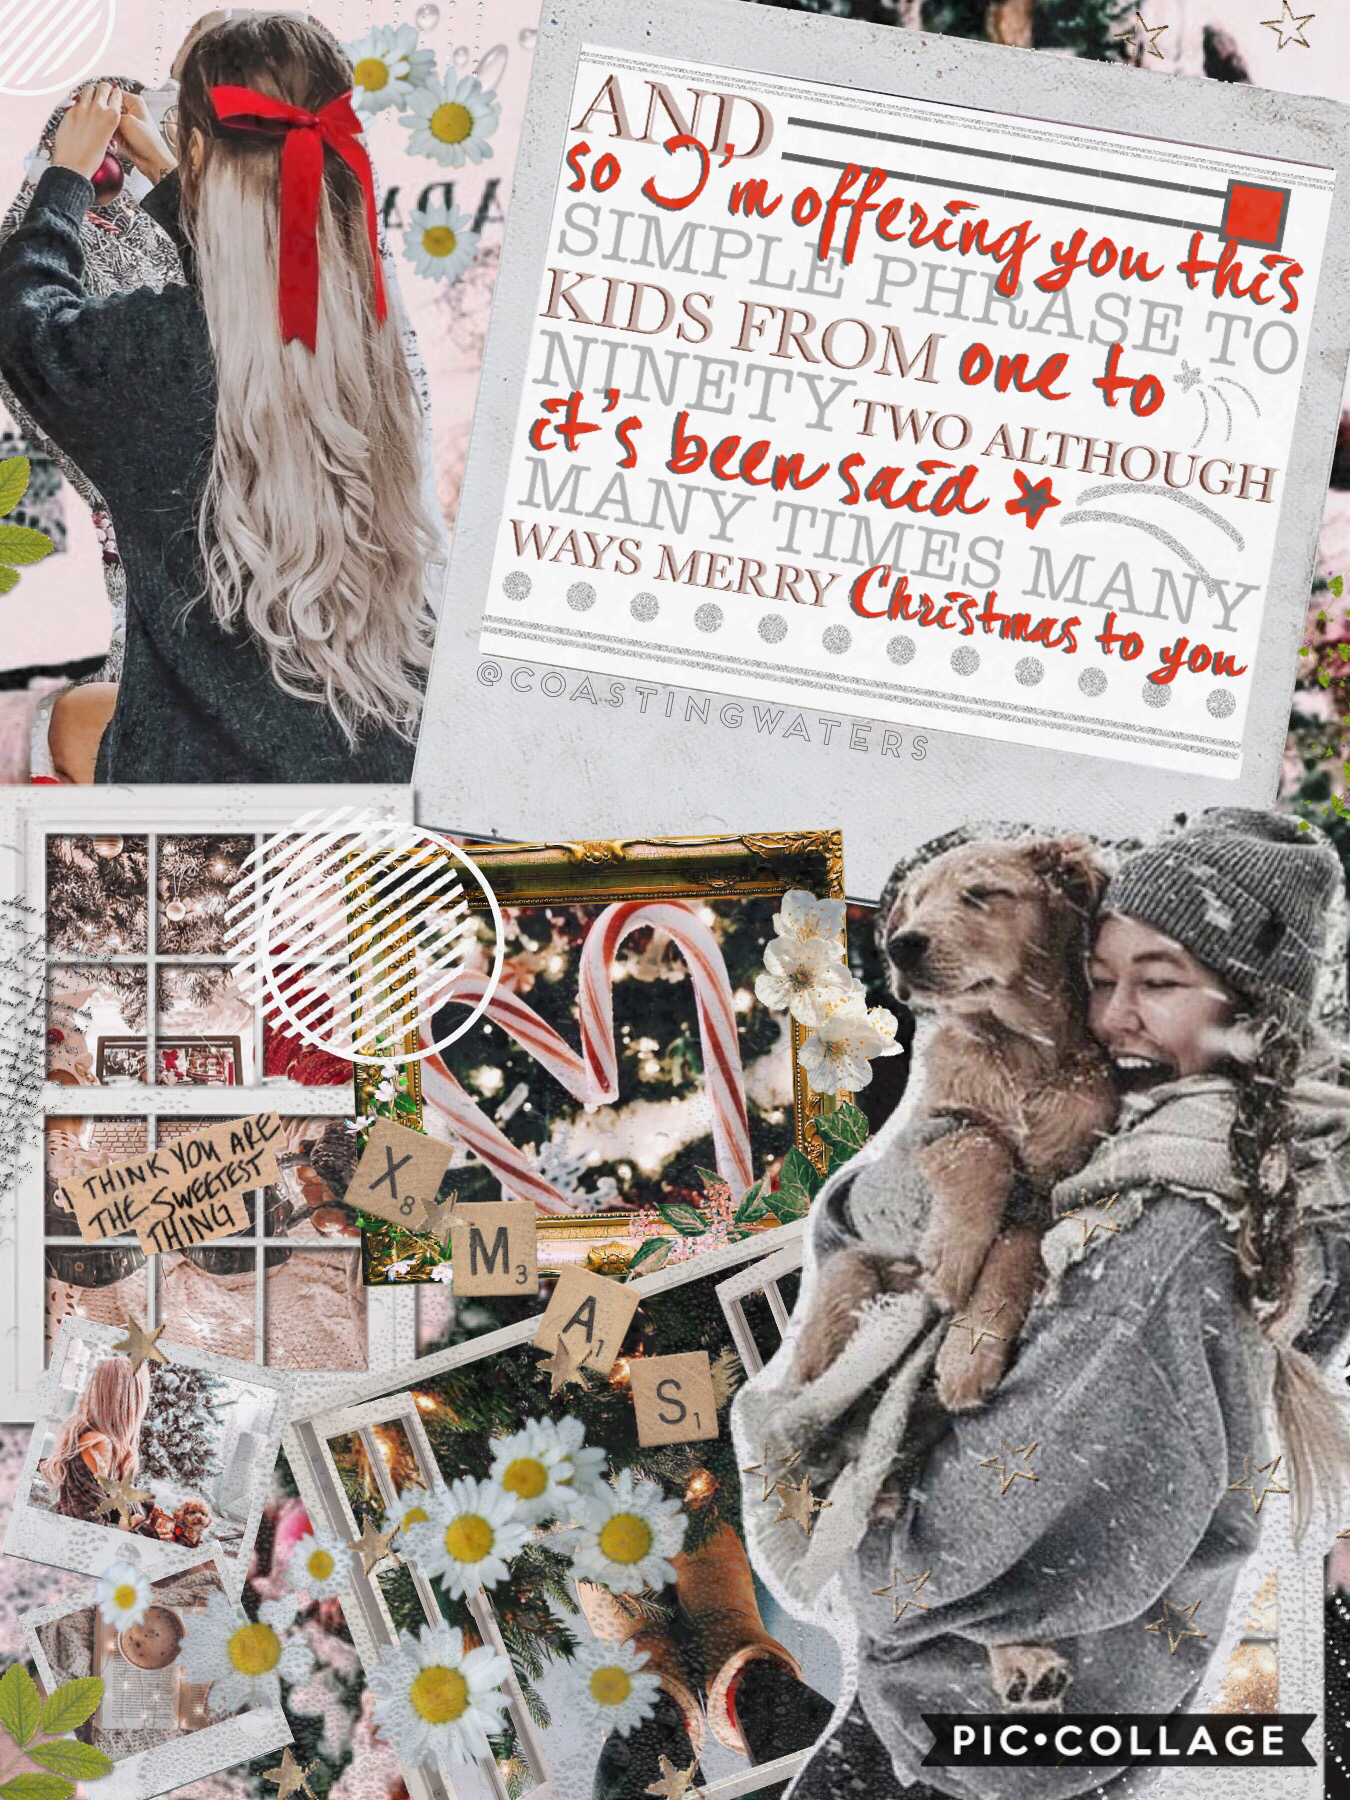 🎄1/12/20🎄
Merry December! I made this for -pretty_little_thingz-‘s contest! Go follow them and make sure to enter the contest! Don’t worry, I won’t be making Christmas collages throughout December, unless you really wanted me to :) QOTD: Are you excited f